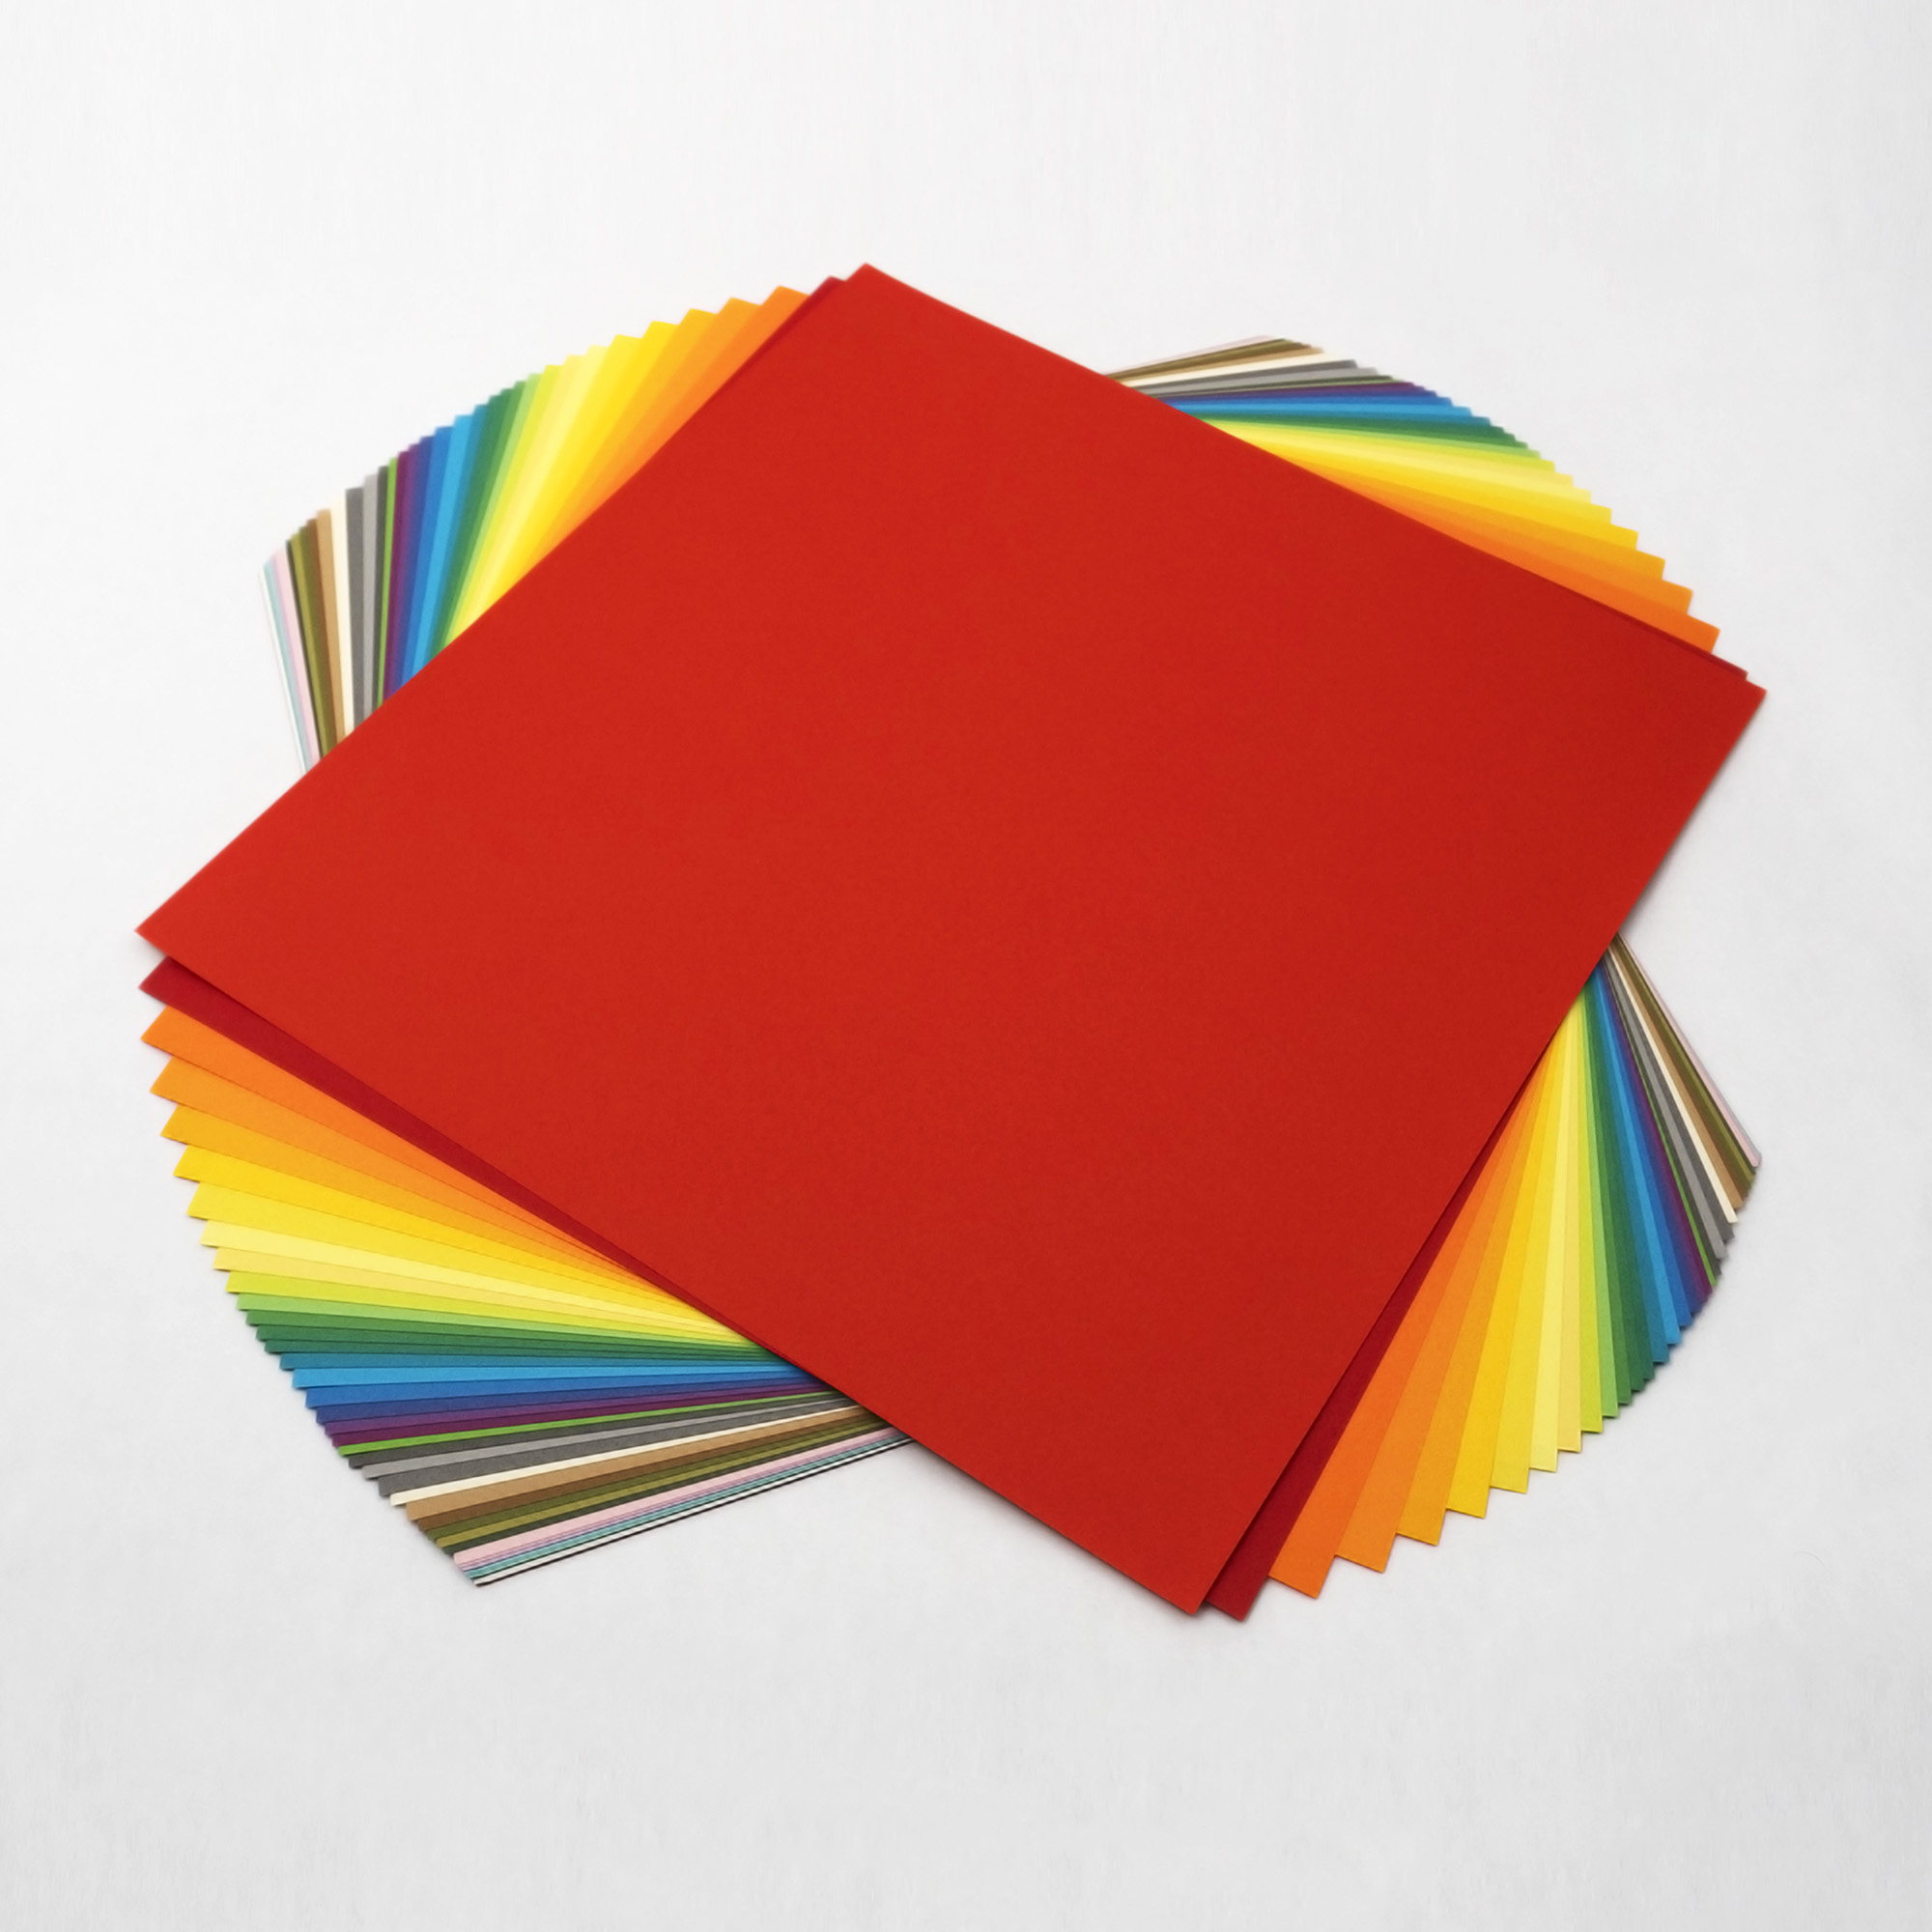 Red A4 paper, color A4 paper, printing paper, color Chinese red